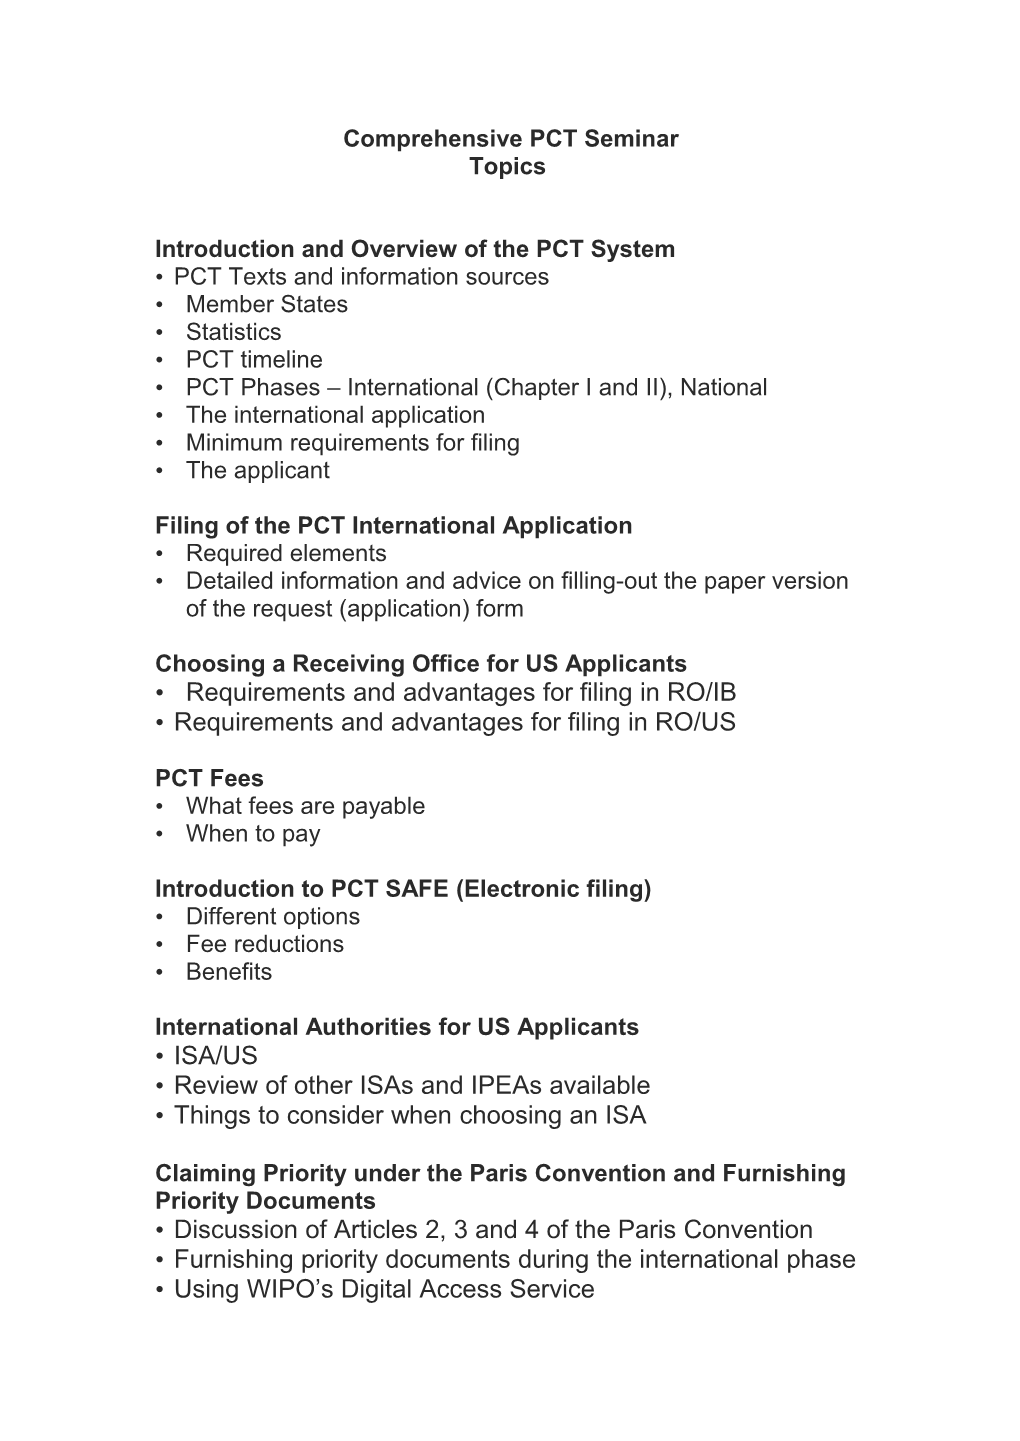 Introduction and Overview of the PCT System